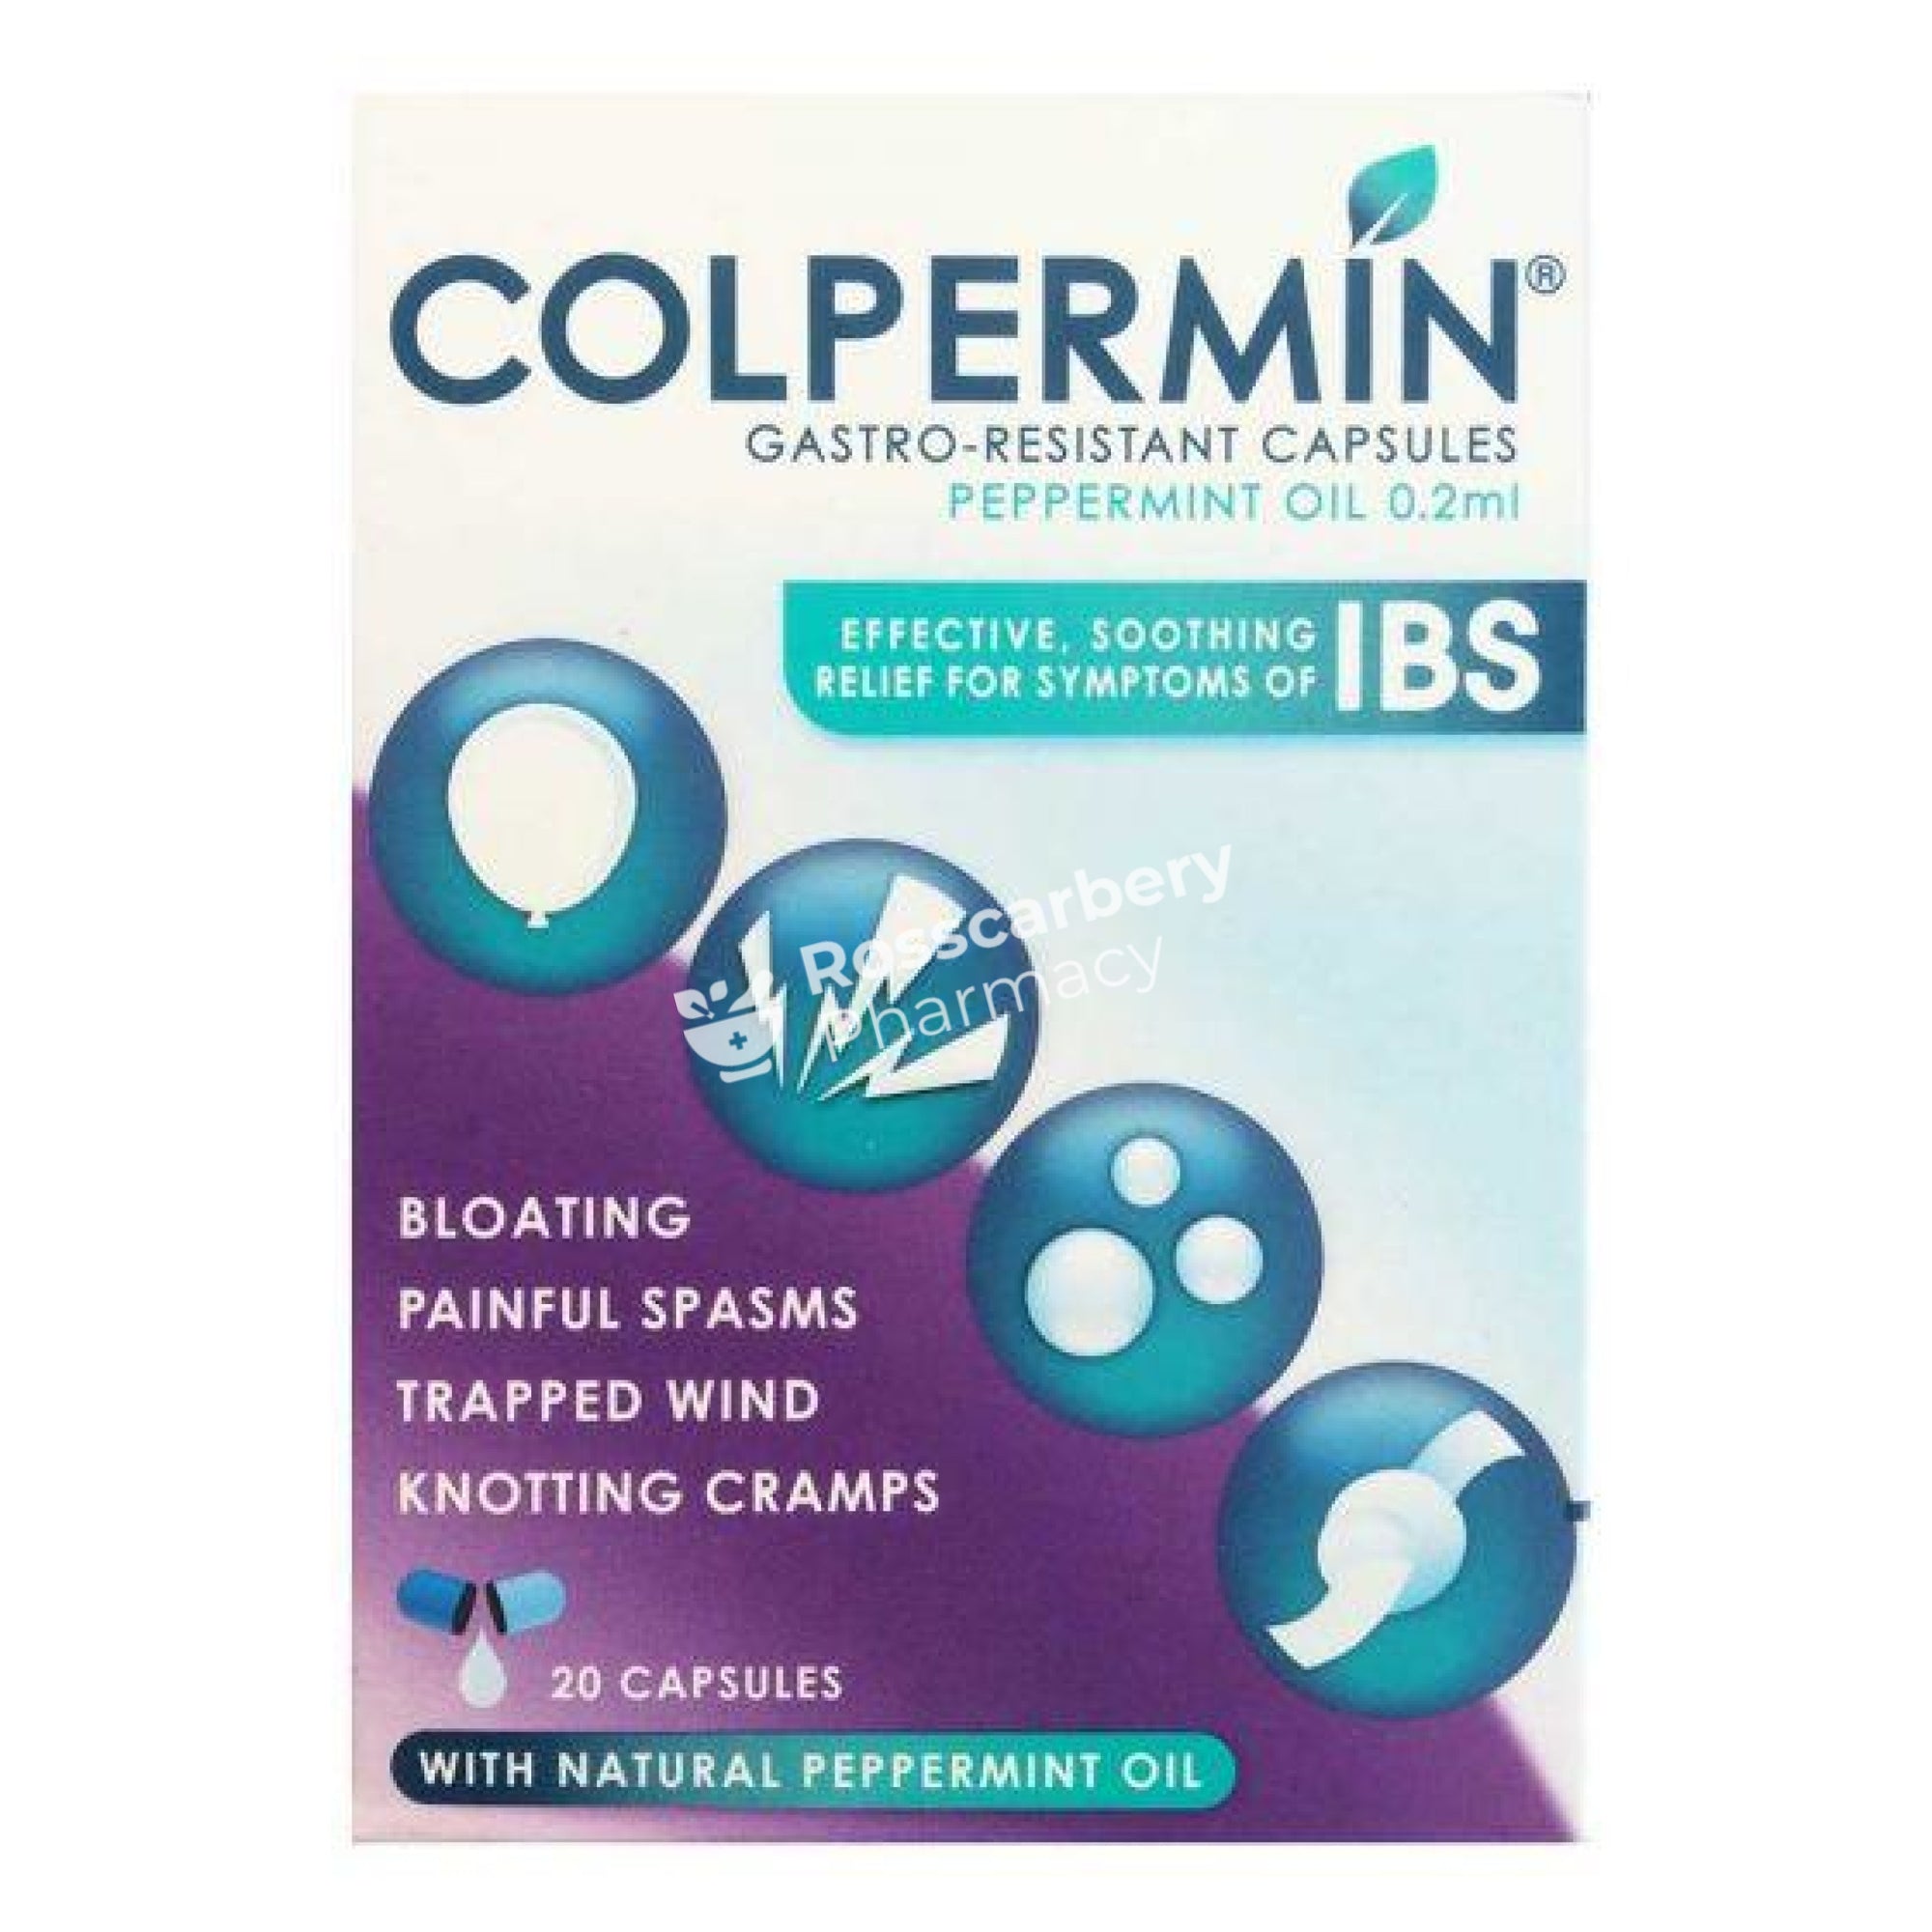 Colpermin Gastro-Resistant Capsules - Peppermint Oil 0.2Ml Cramping & Ibs